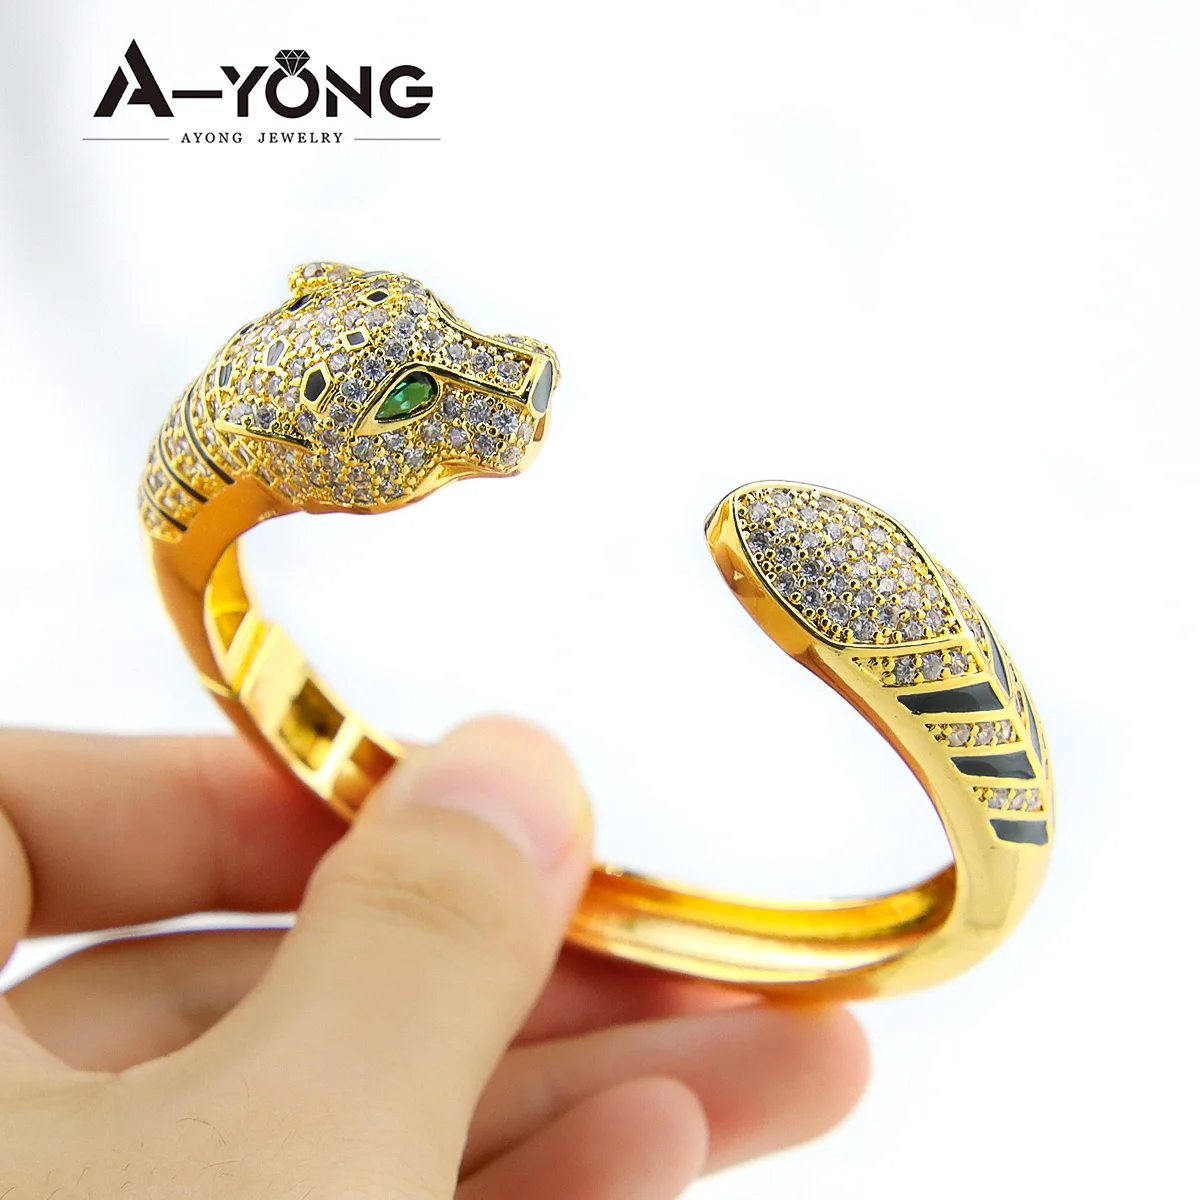 

AYONG Dubai Gold Leopard Bracelet 24k Gold Plated Cubic Zircon Stone Green Eyes Panther Middle East Cuff Bangle Wedding Parts